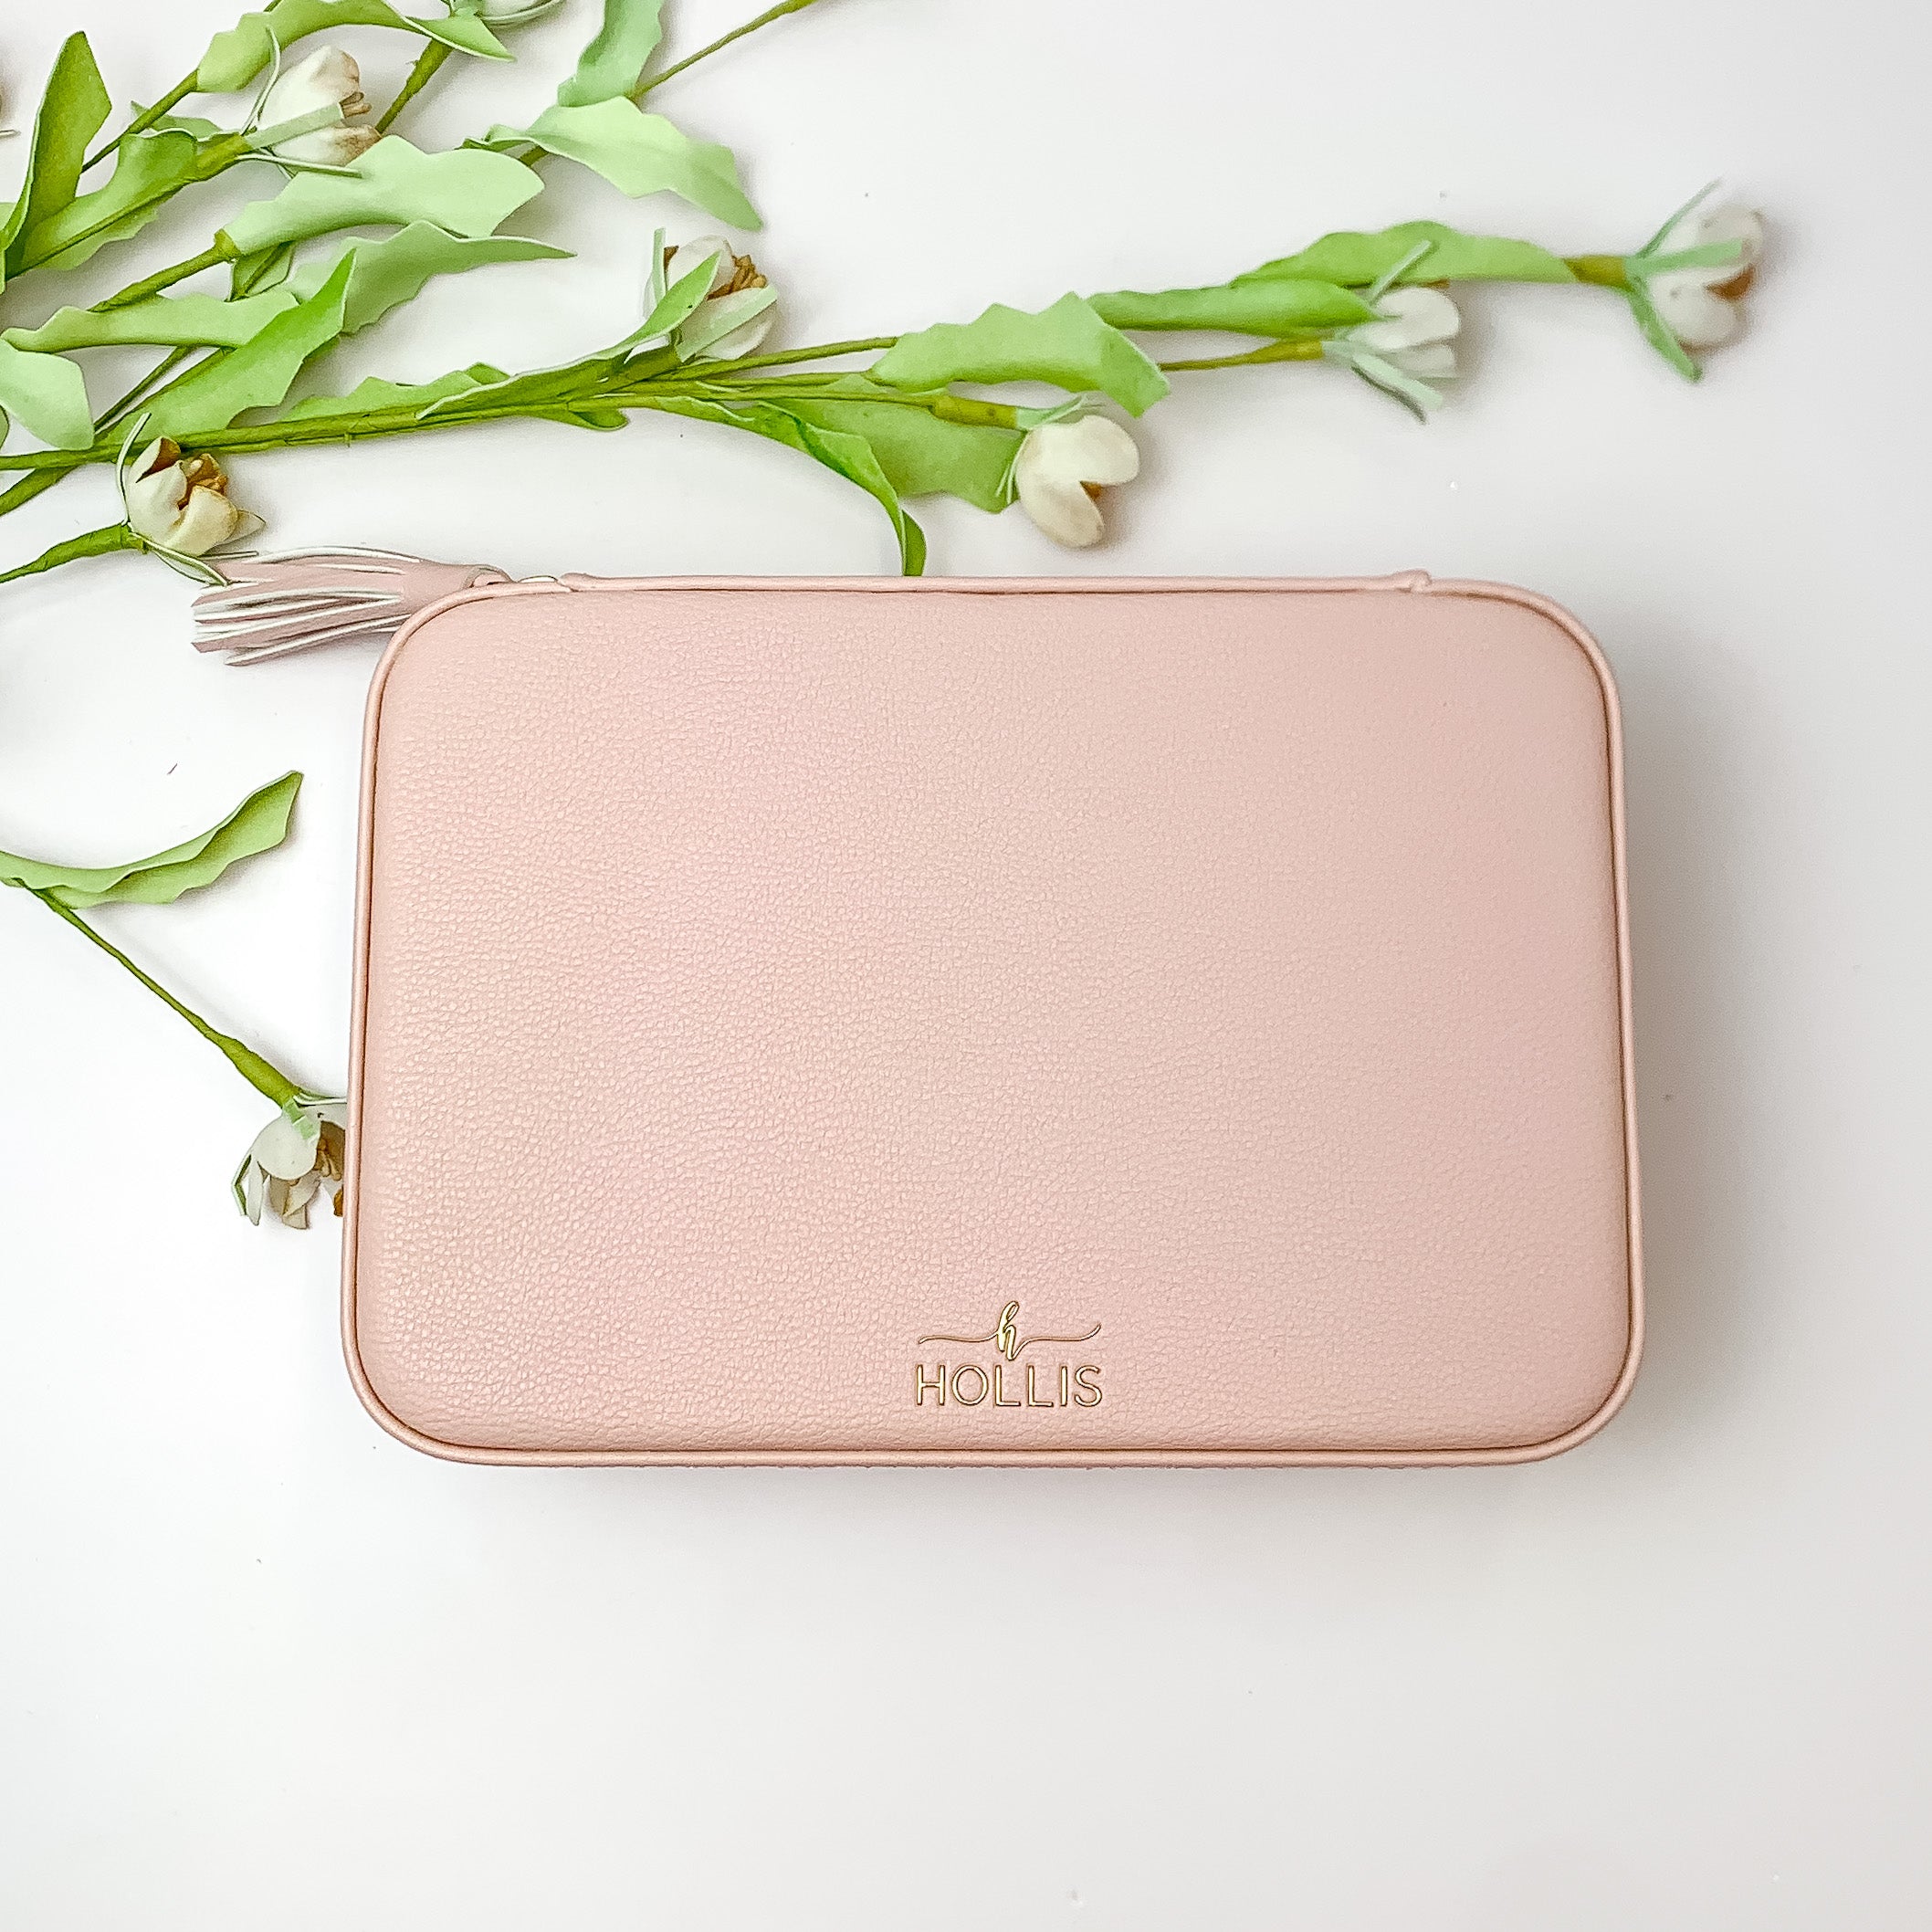 Hollis | Jewelry Organizer in Blush - Giddy Up Glamour Boutique